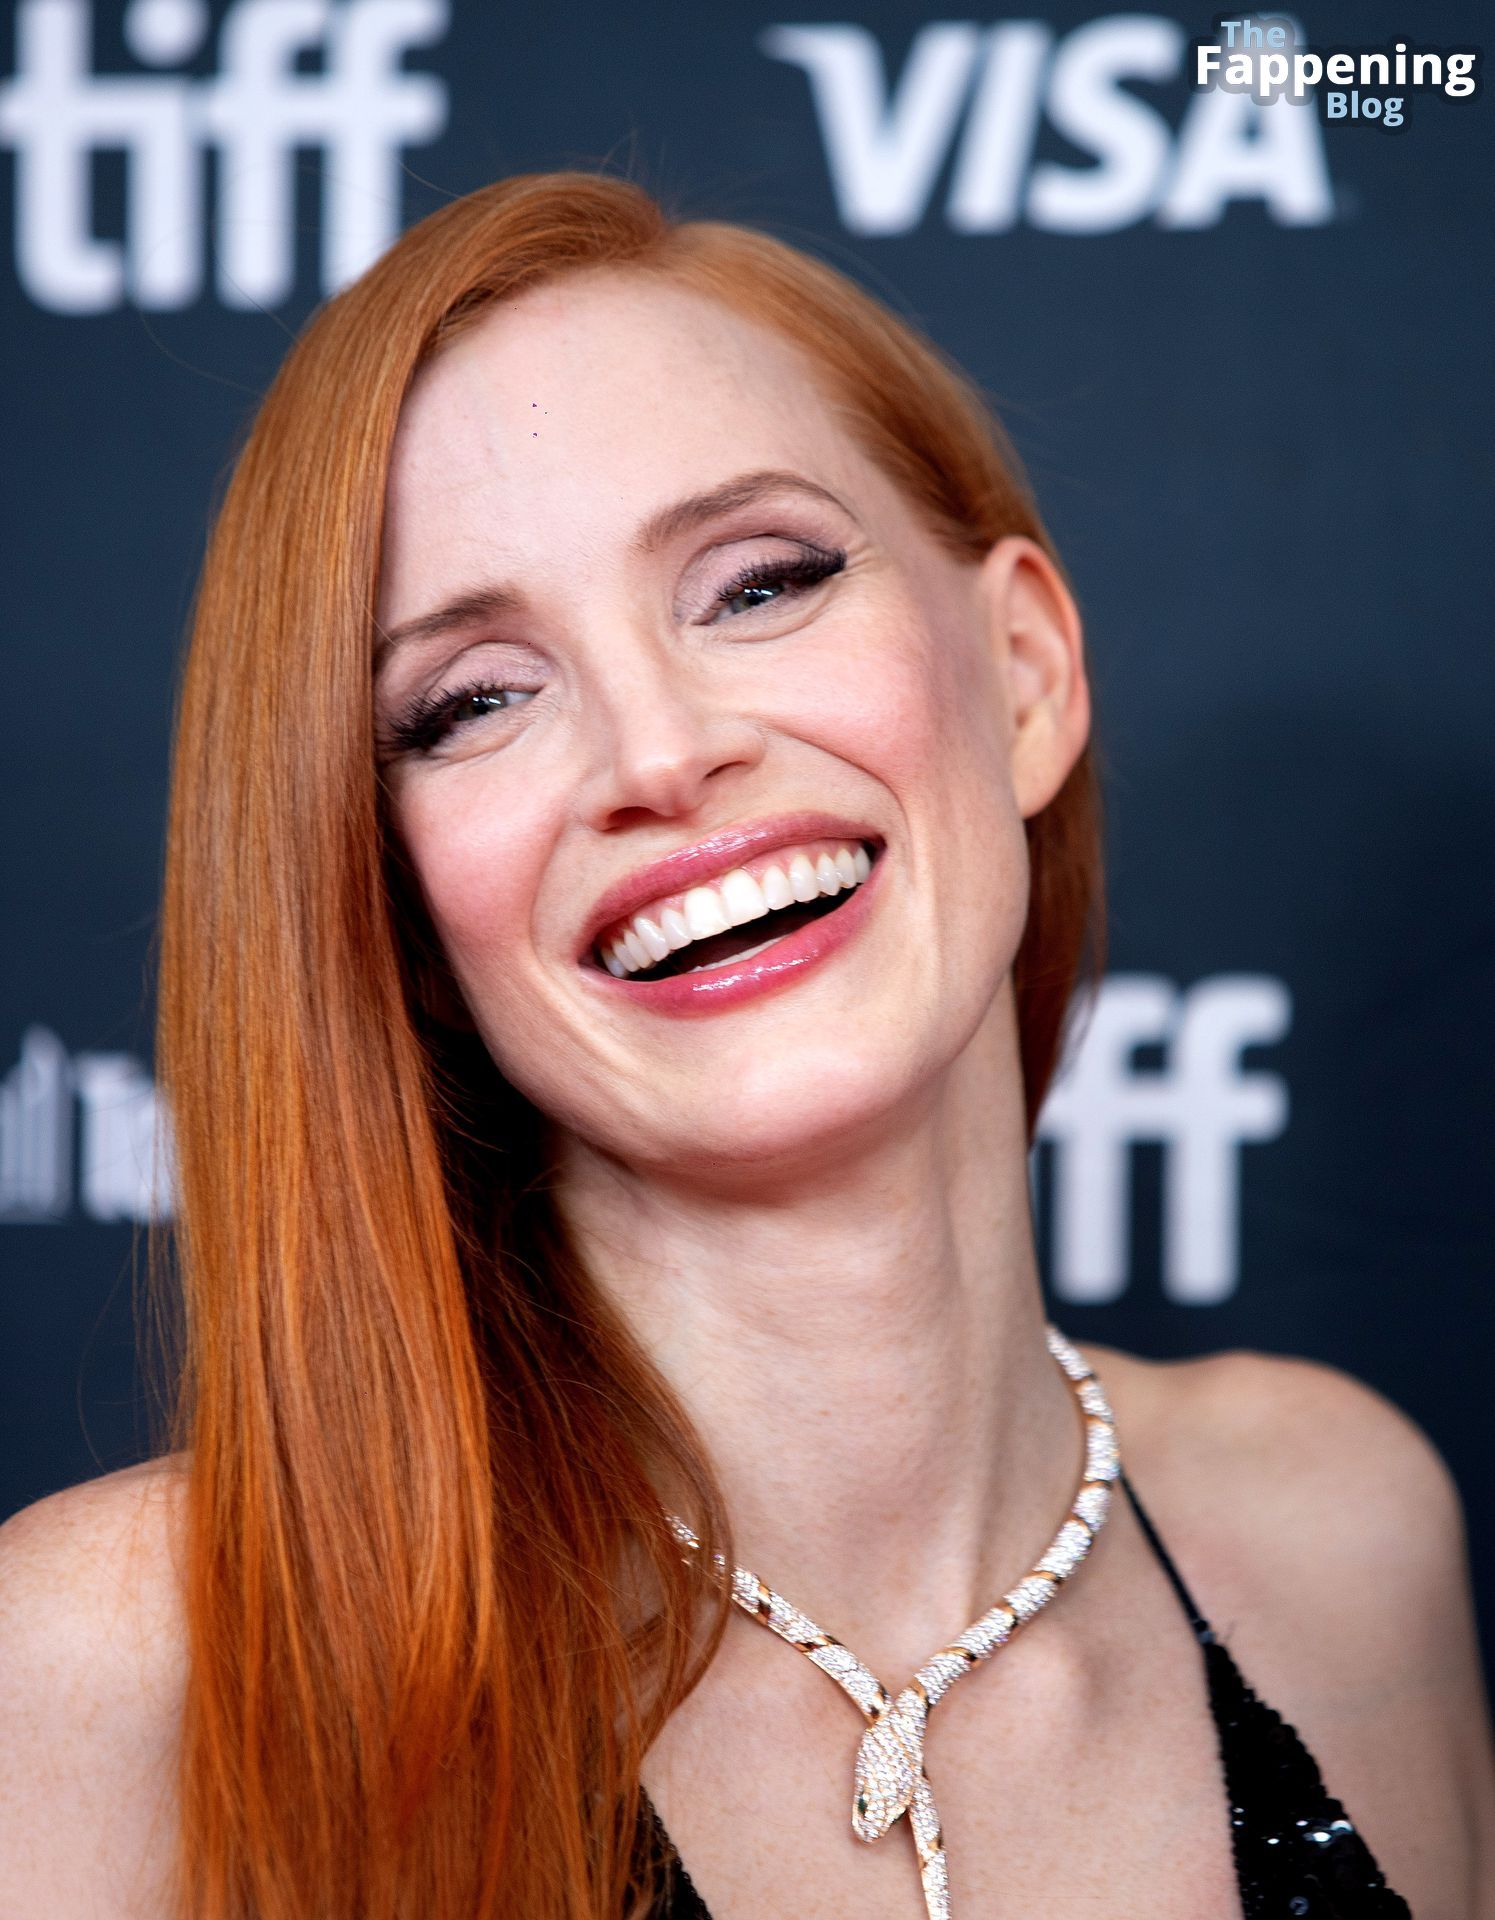 Jessica-Chastain-Sexy-48-The-Fappening-Blog.jpg